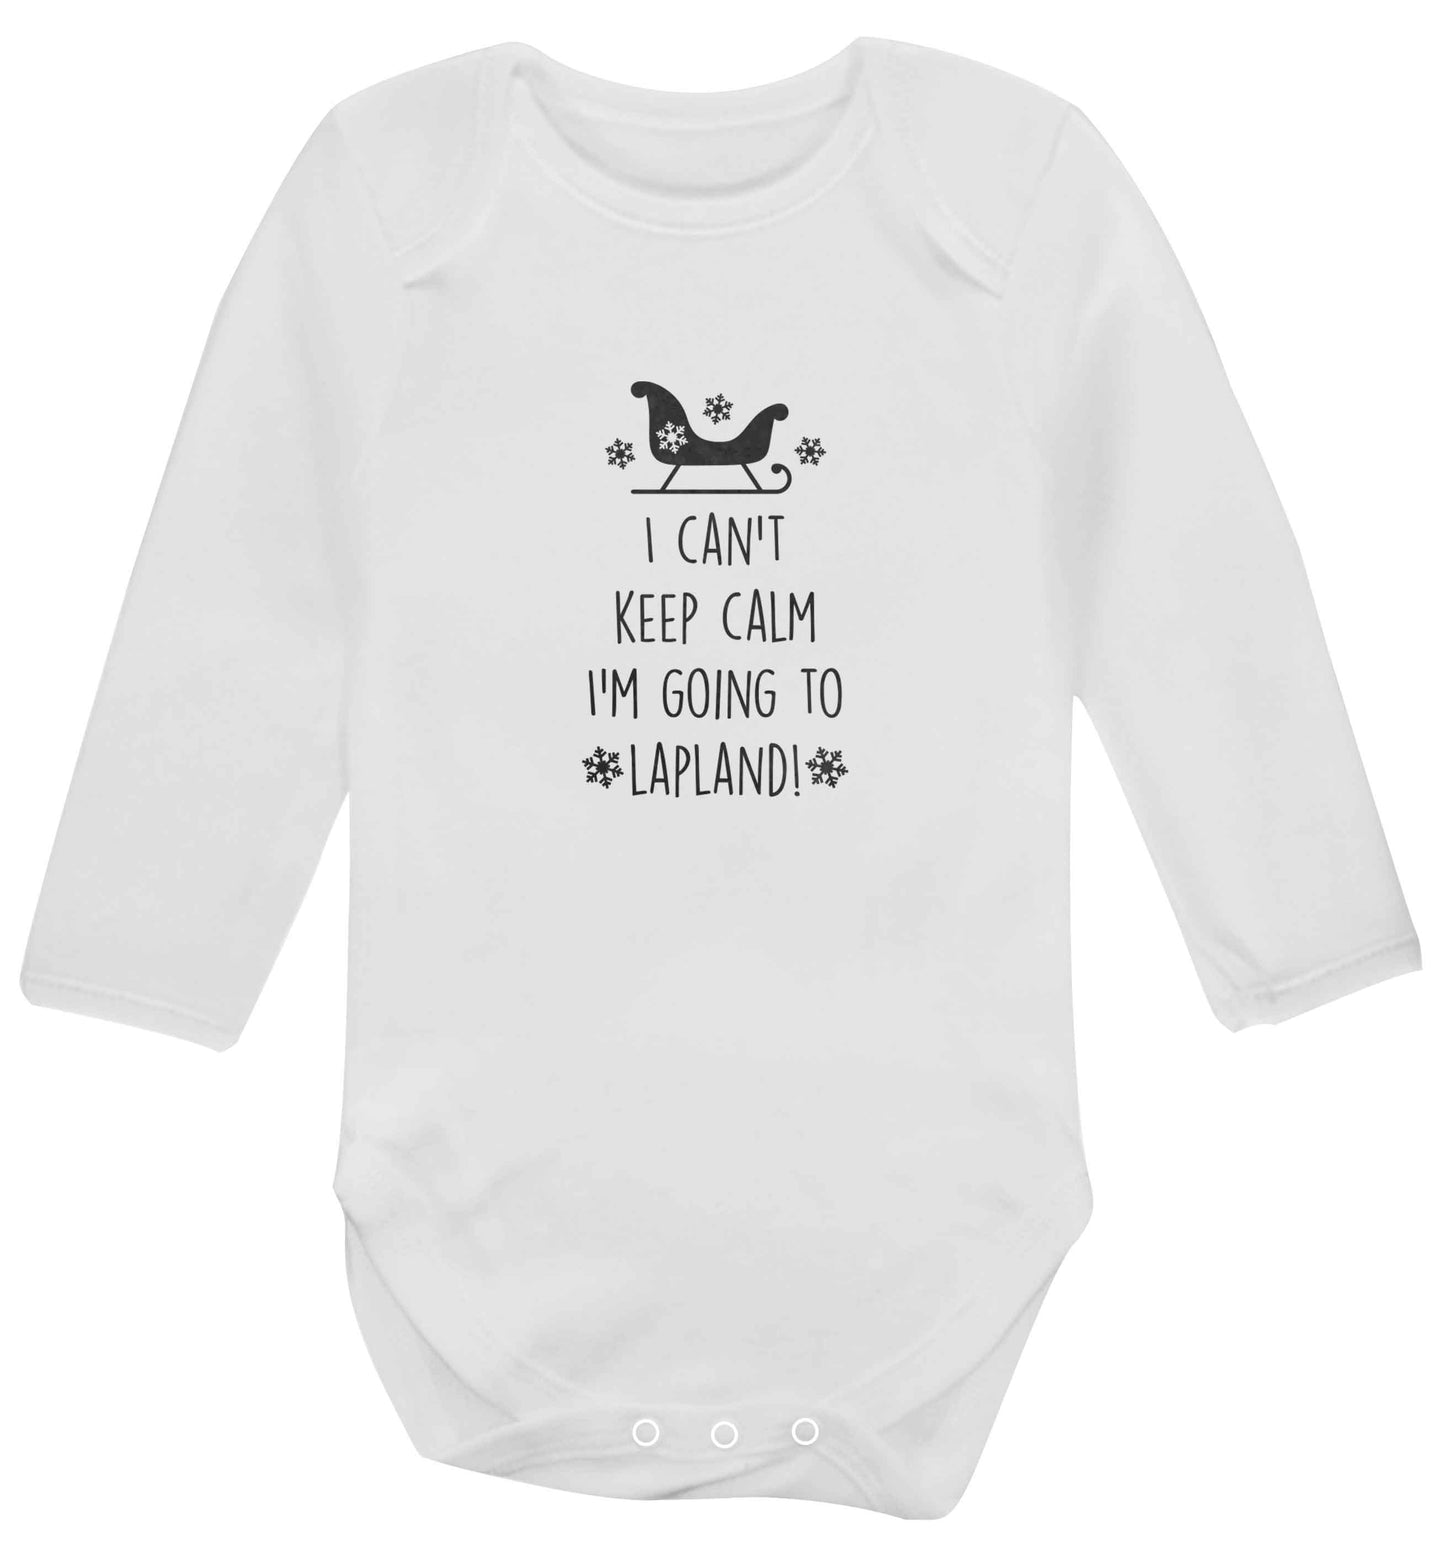 I can't keep calm I'm going to Lapland baby vest long sleeved white 6-12 months